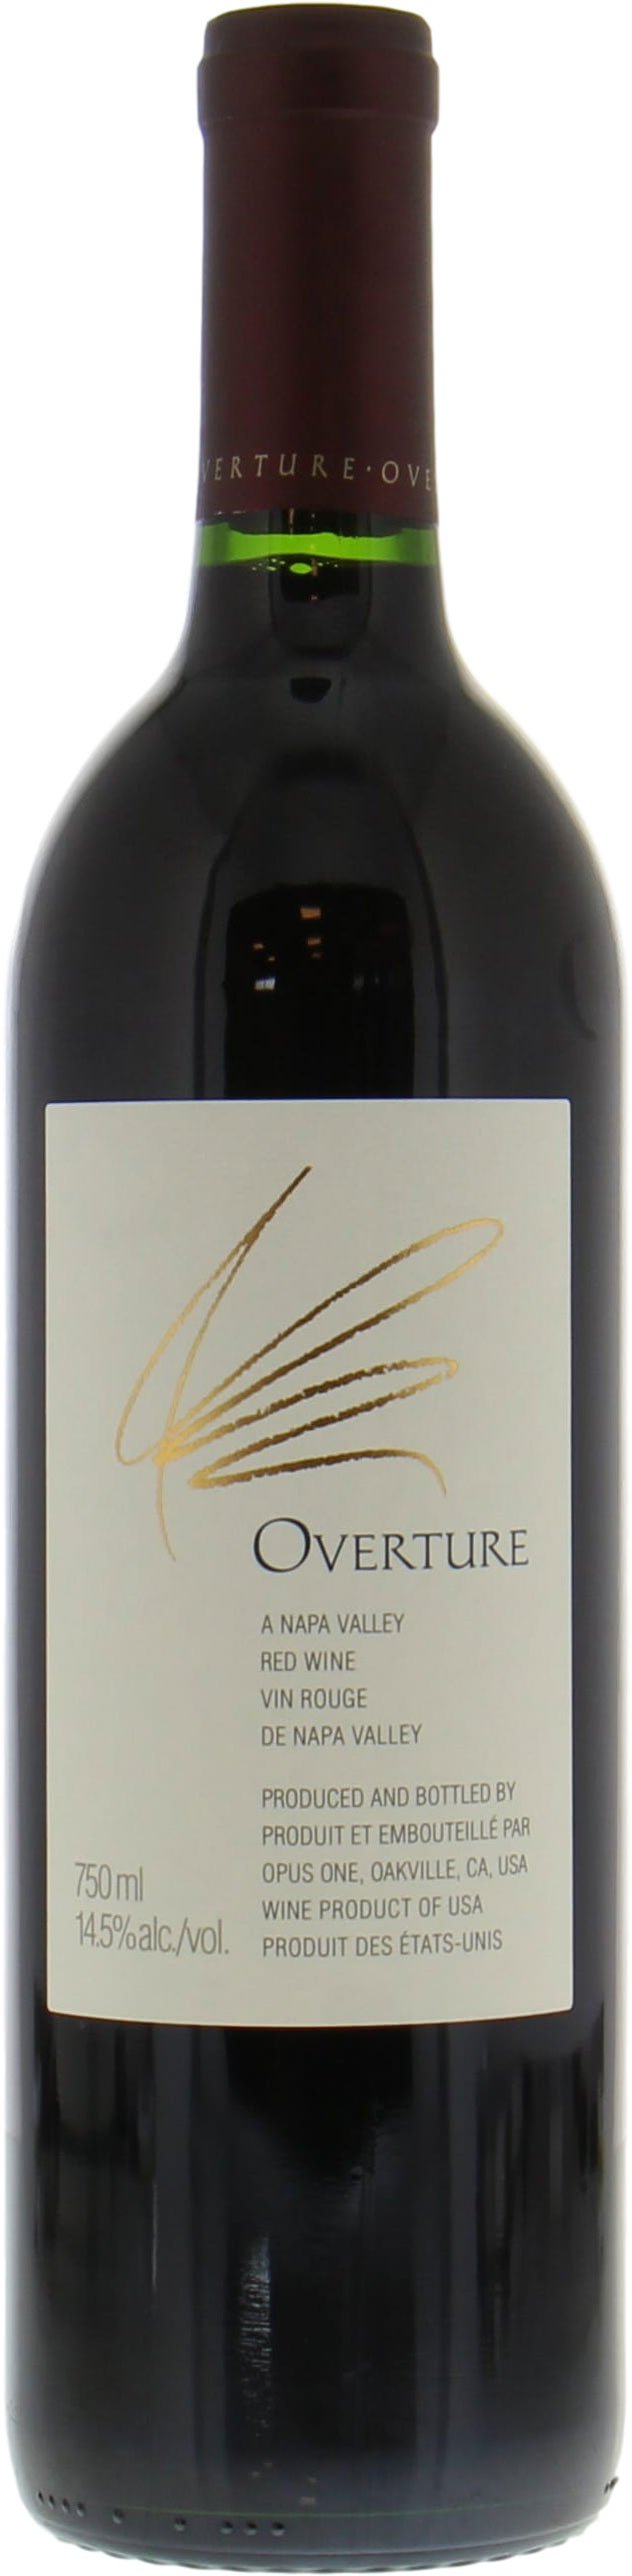 overture red blend by opus one